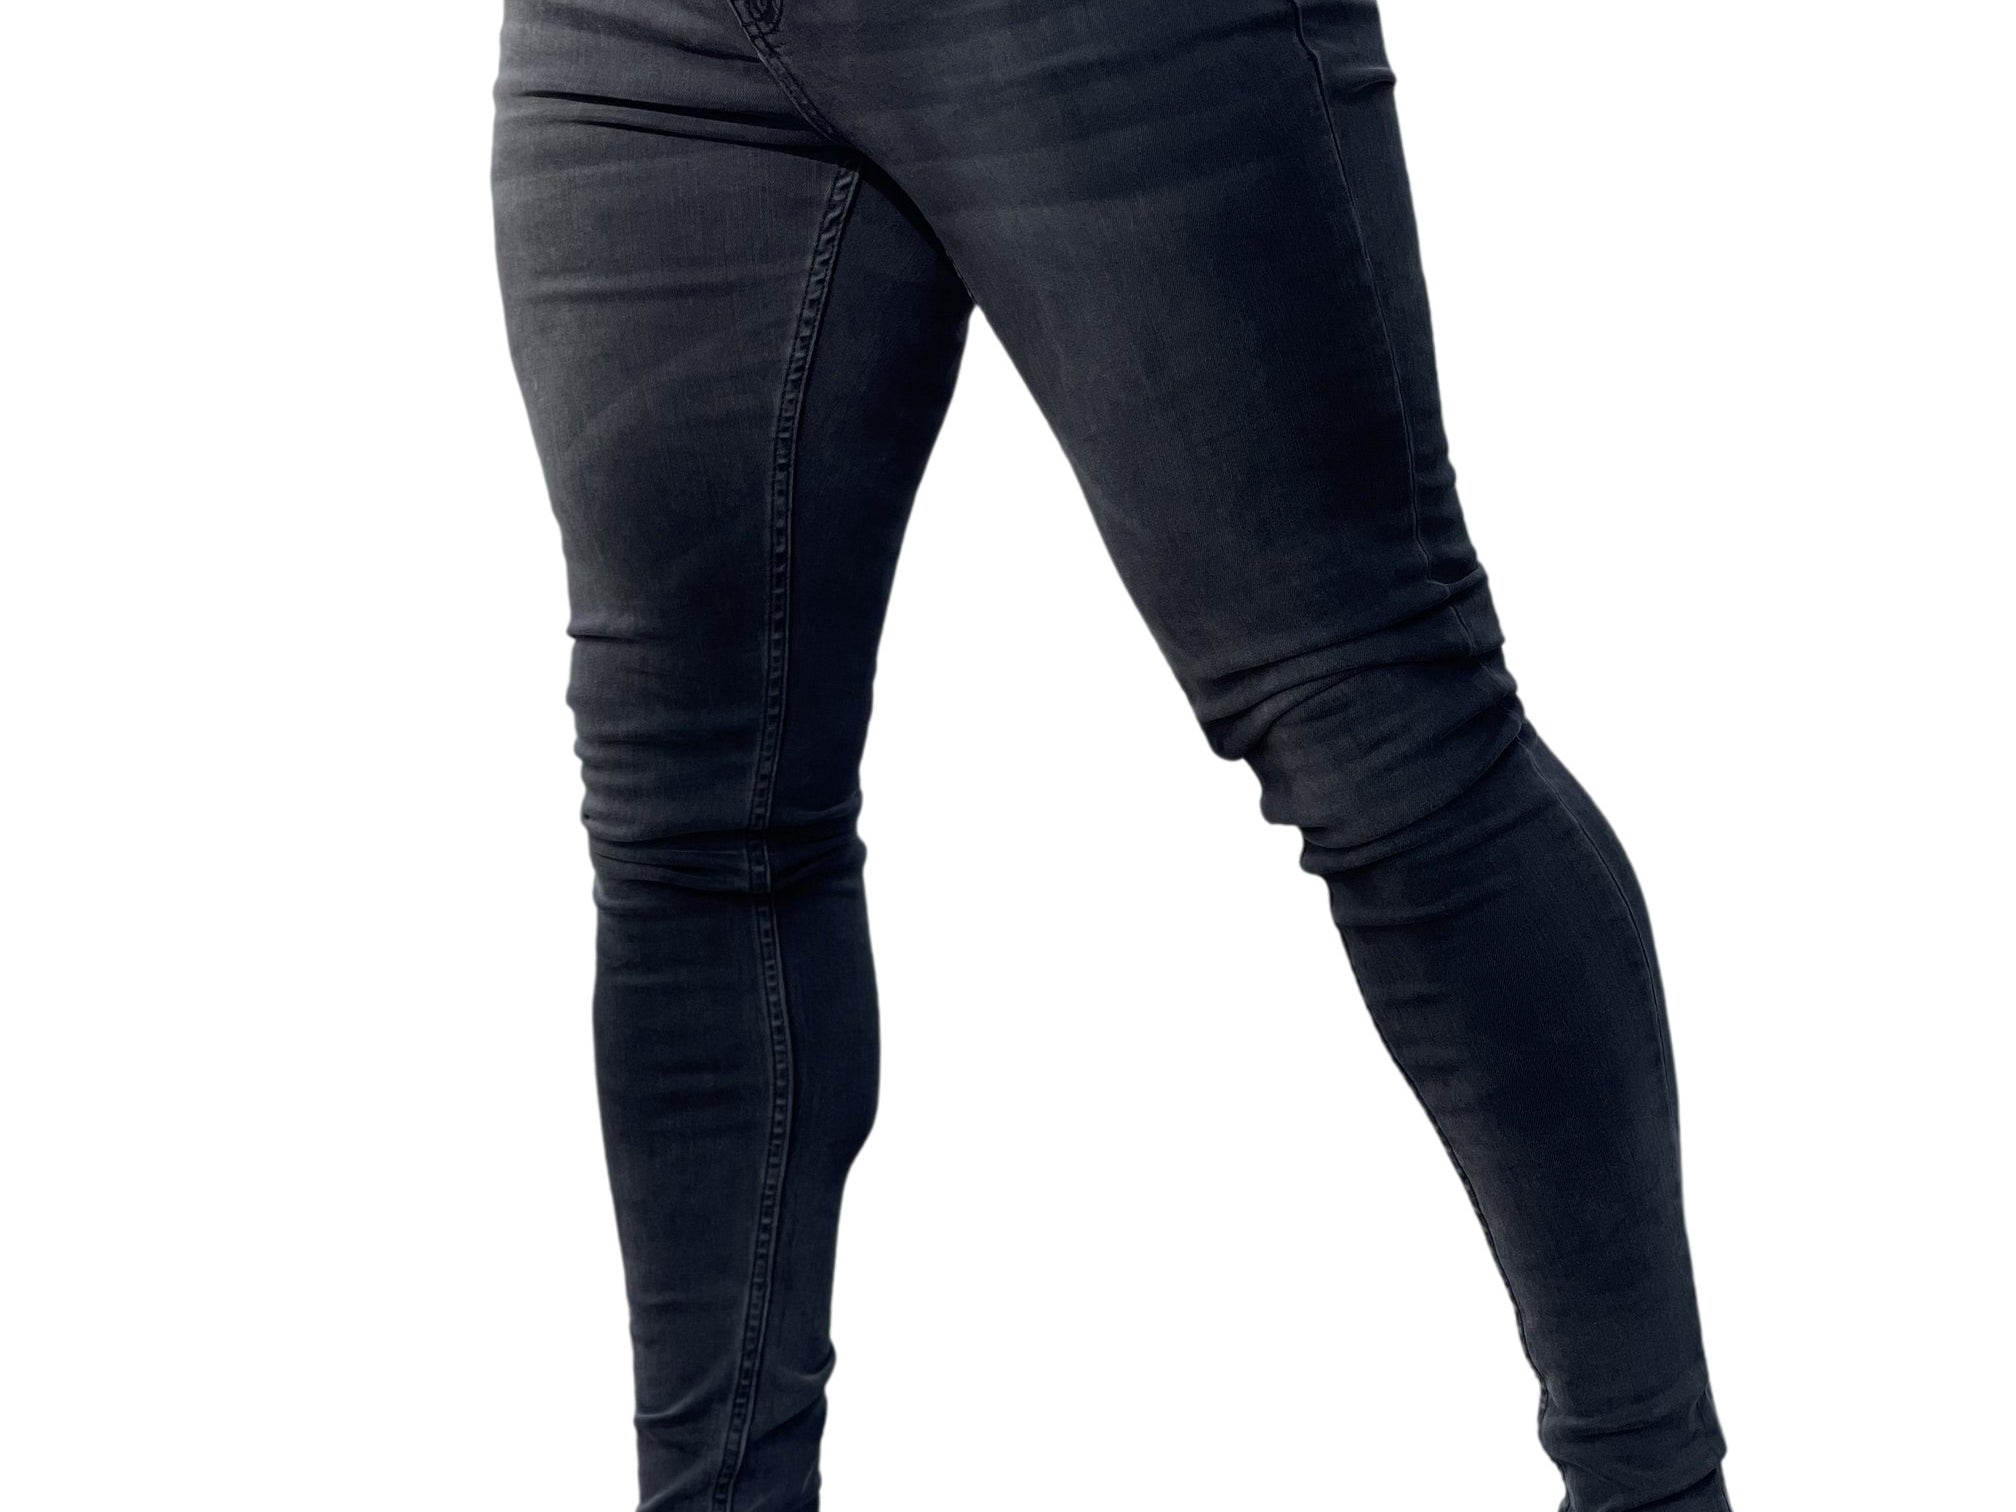 Survival - Grey Skinny Jeans for Men - Sarman Fashion - Wholesale Clothing Fashion Brand for Men from Canada